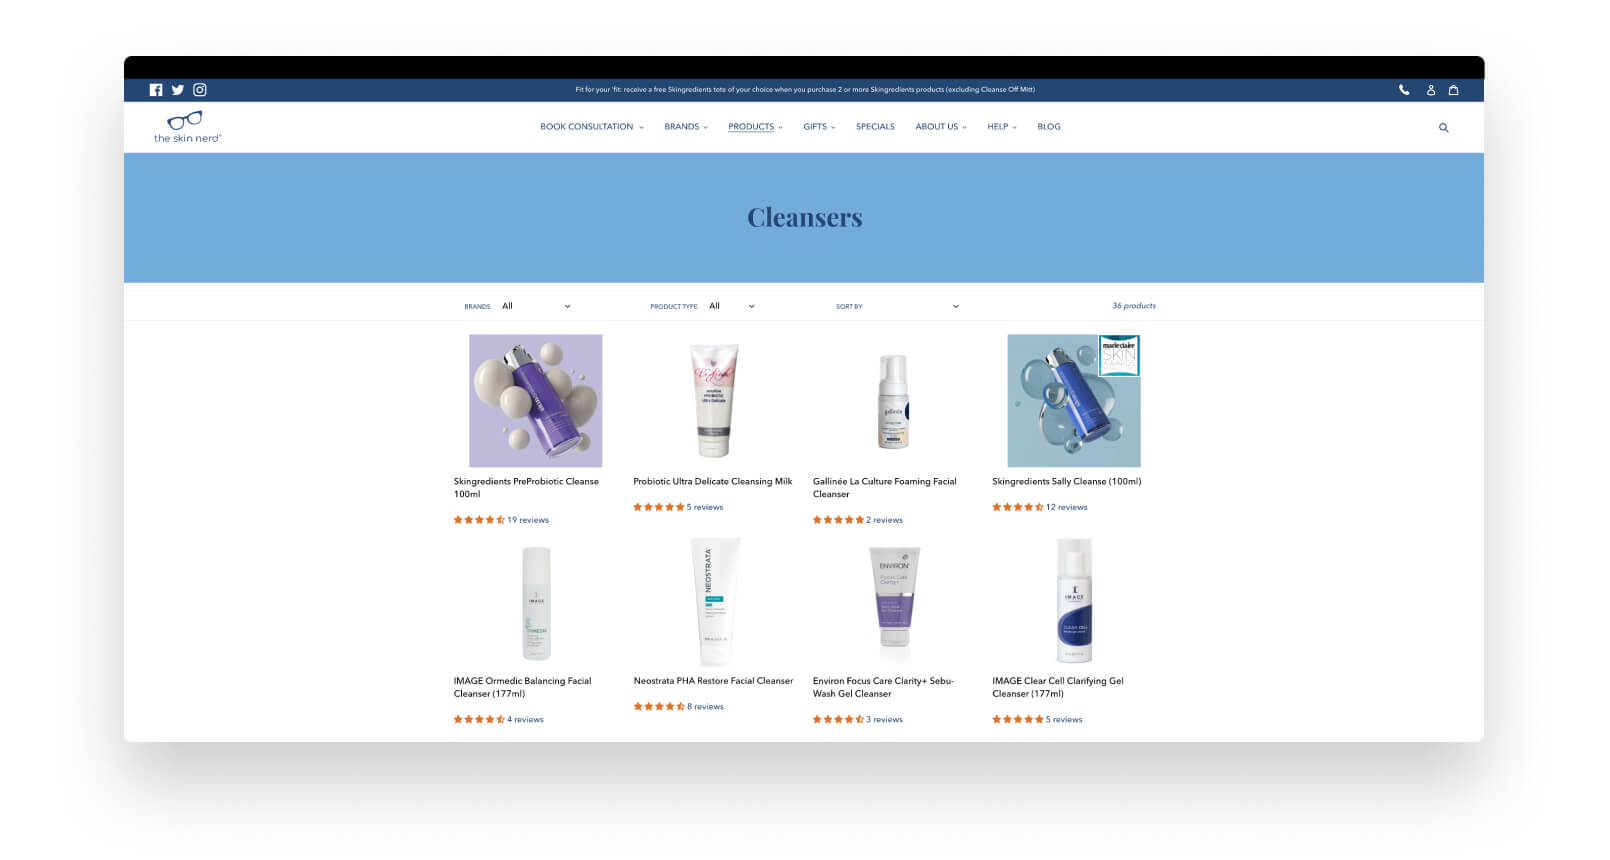 A screenshot of the desktop view of The Skin Nerd's digital store, showing a product category page displaying an assortment of different cleansers.